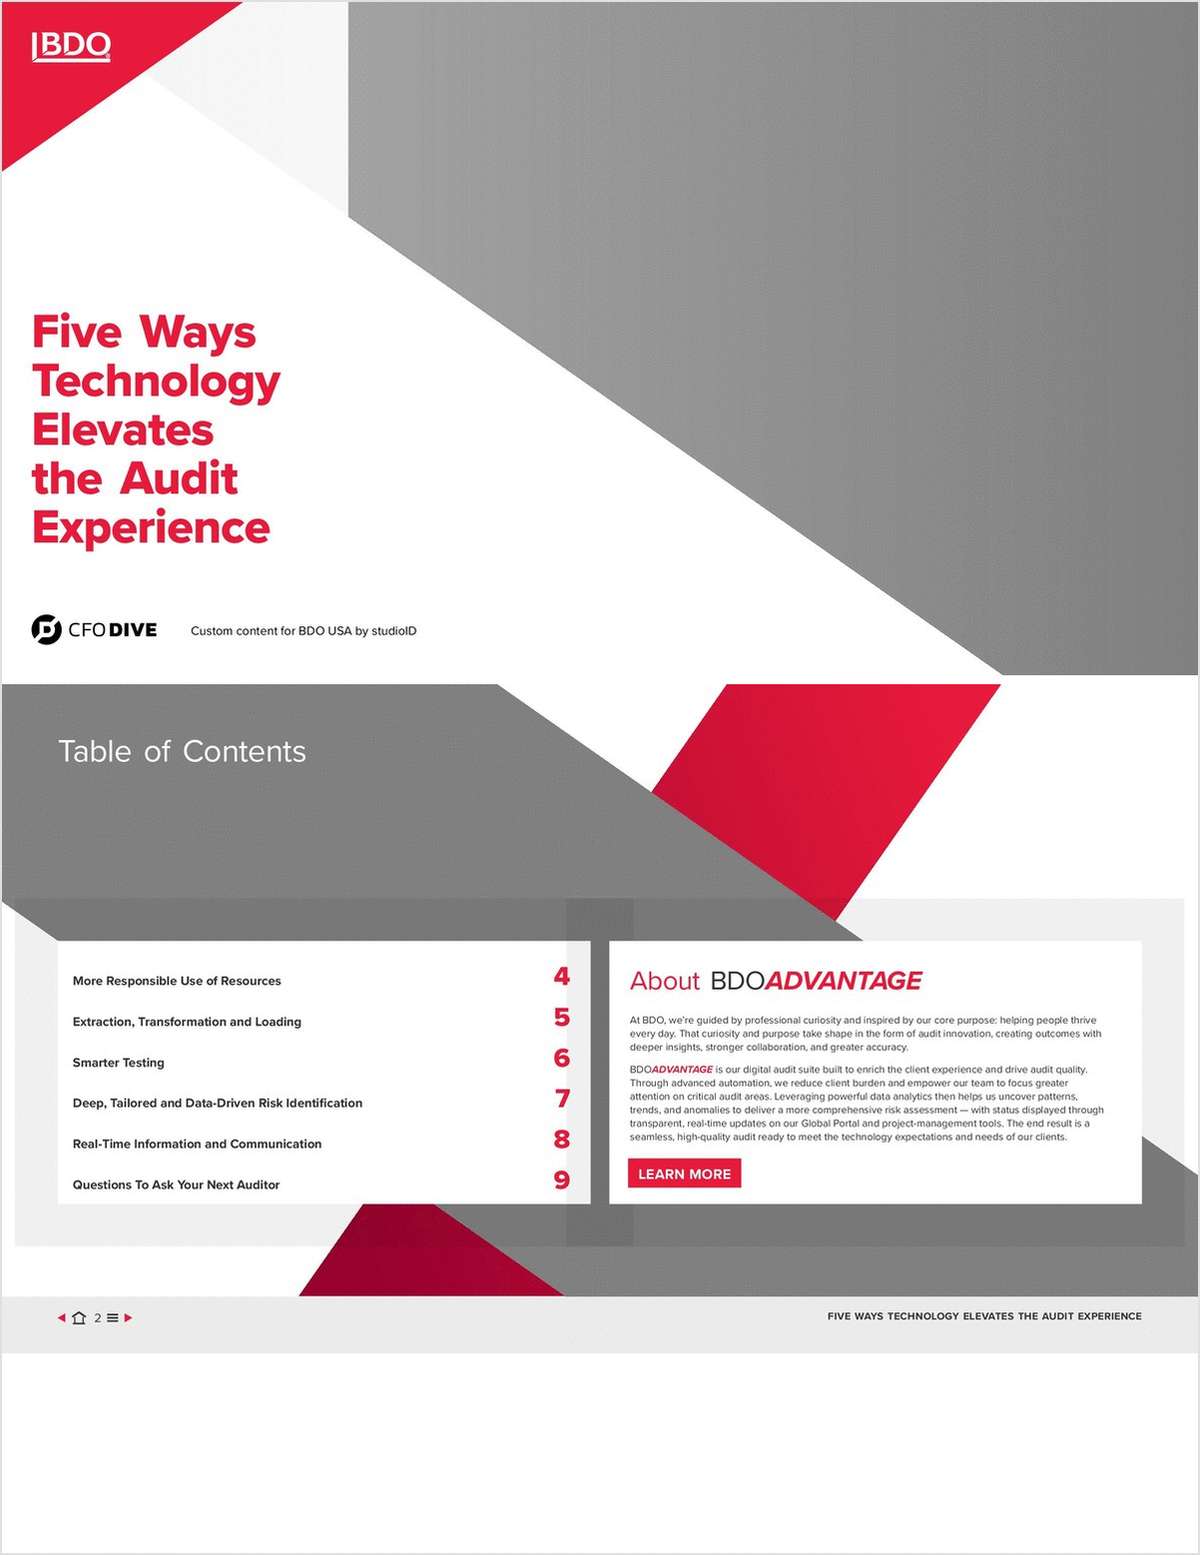 Five Ways Technology Elevates the Audit Experience